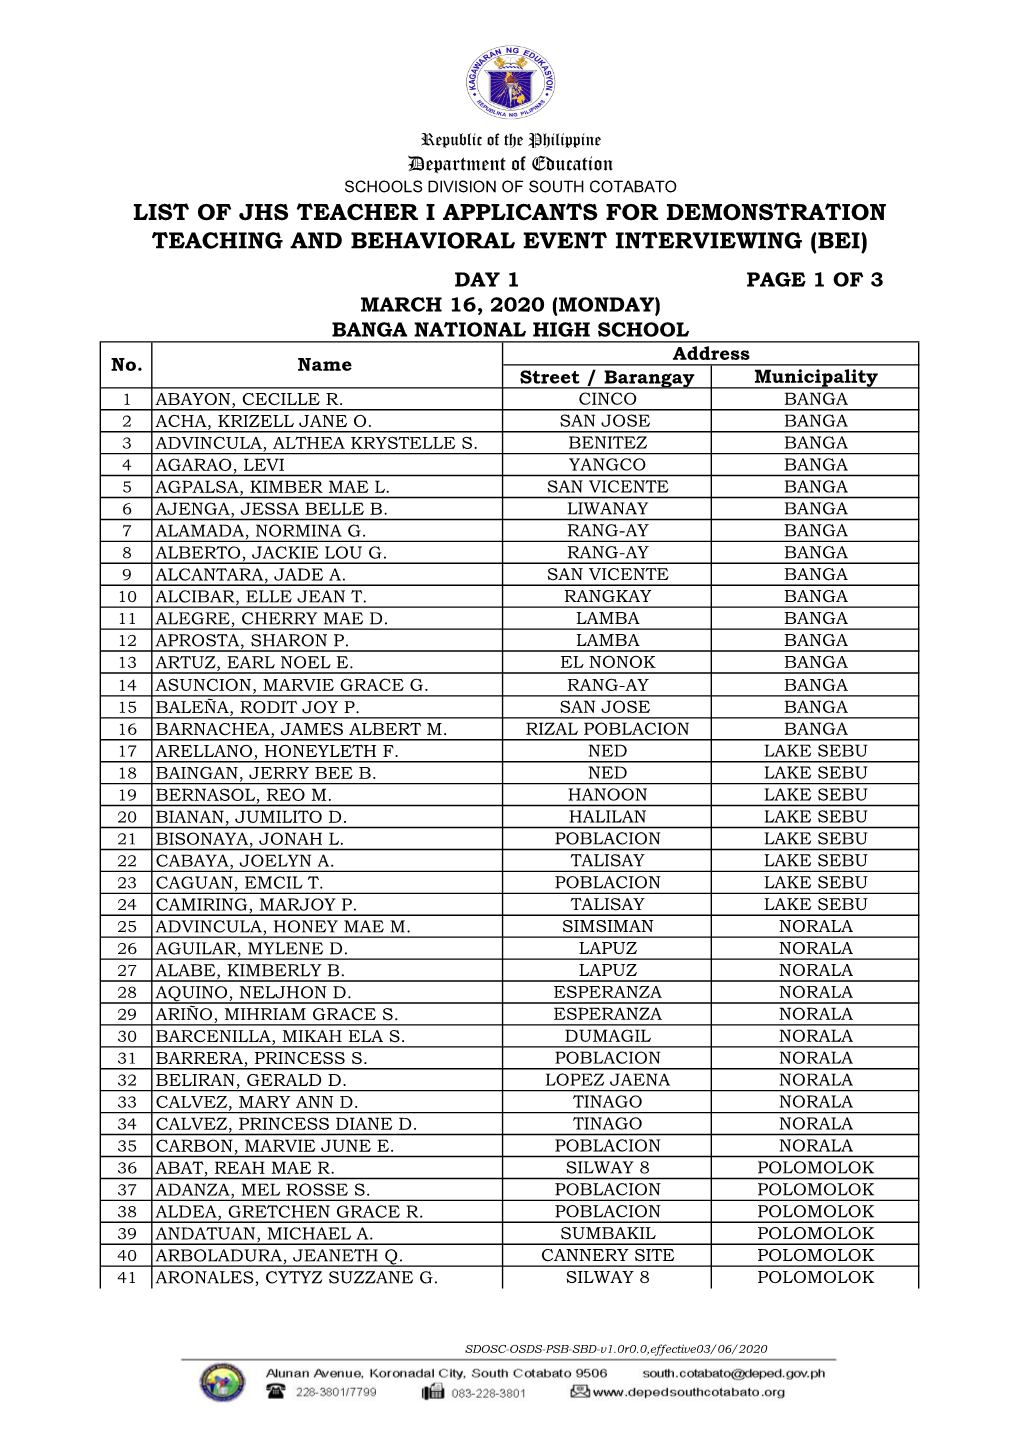 List of Jhs Teacher I Applicants for Demonstration Teaching and Behavioral Event Interviewing (Bei)